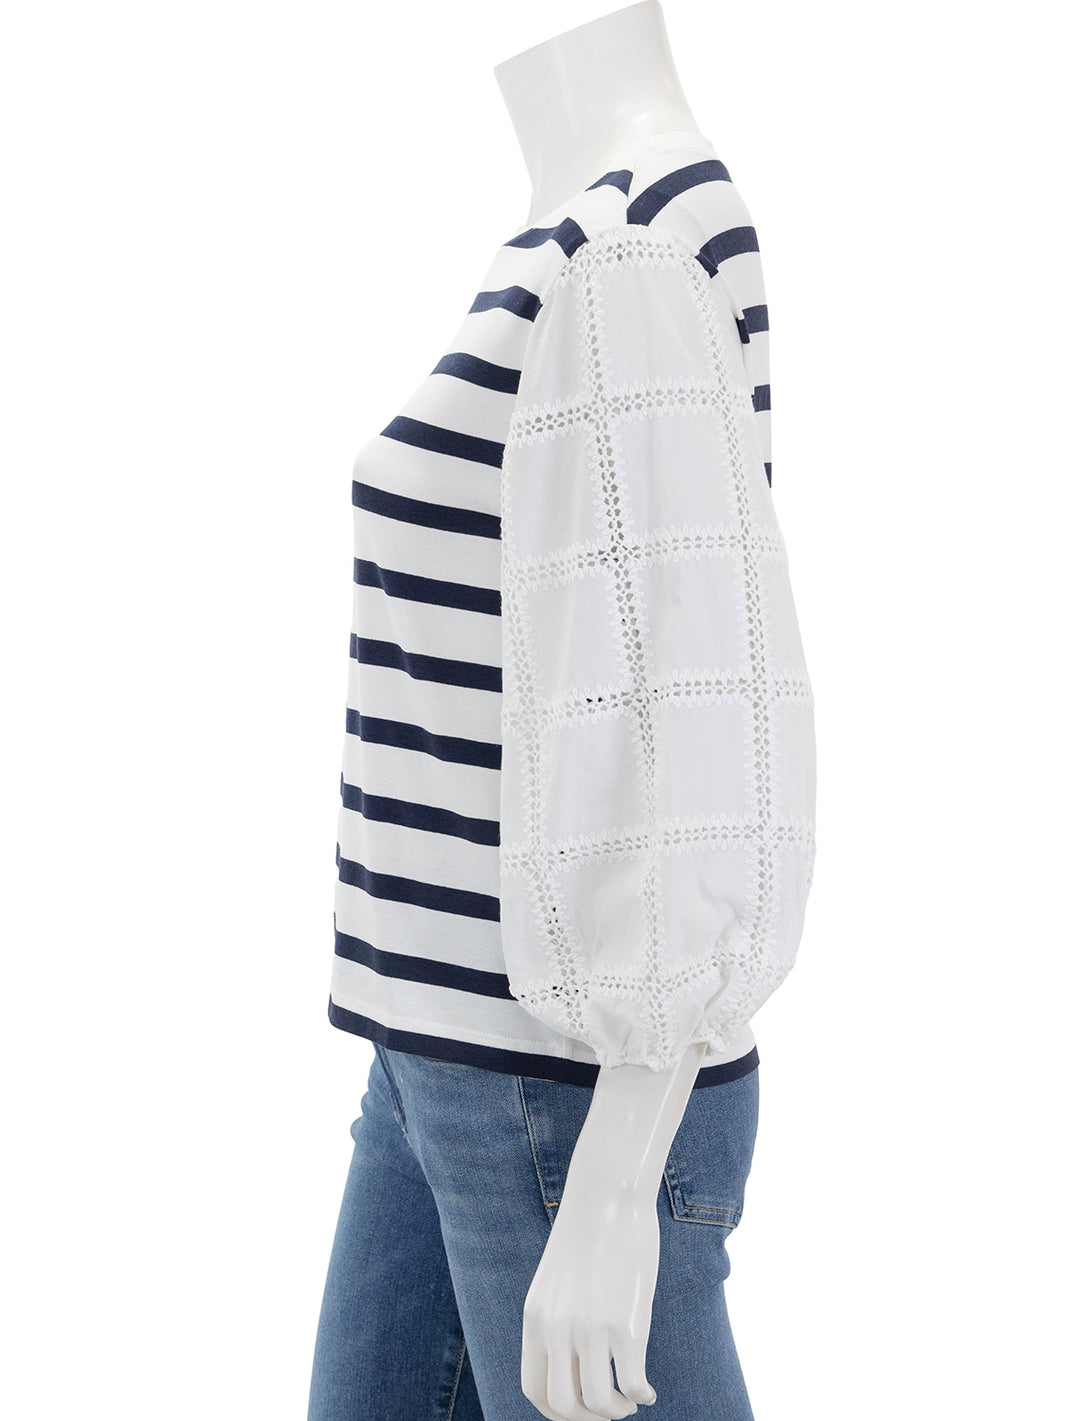 Side view of Vilagallo's eugen top in navy and white.